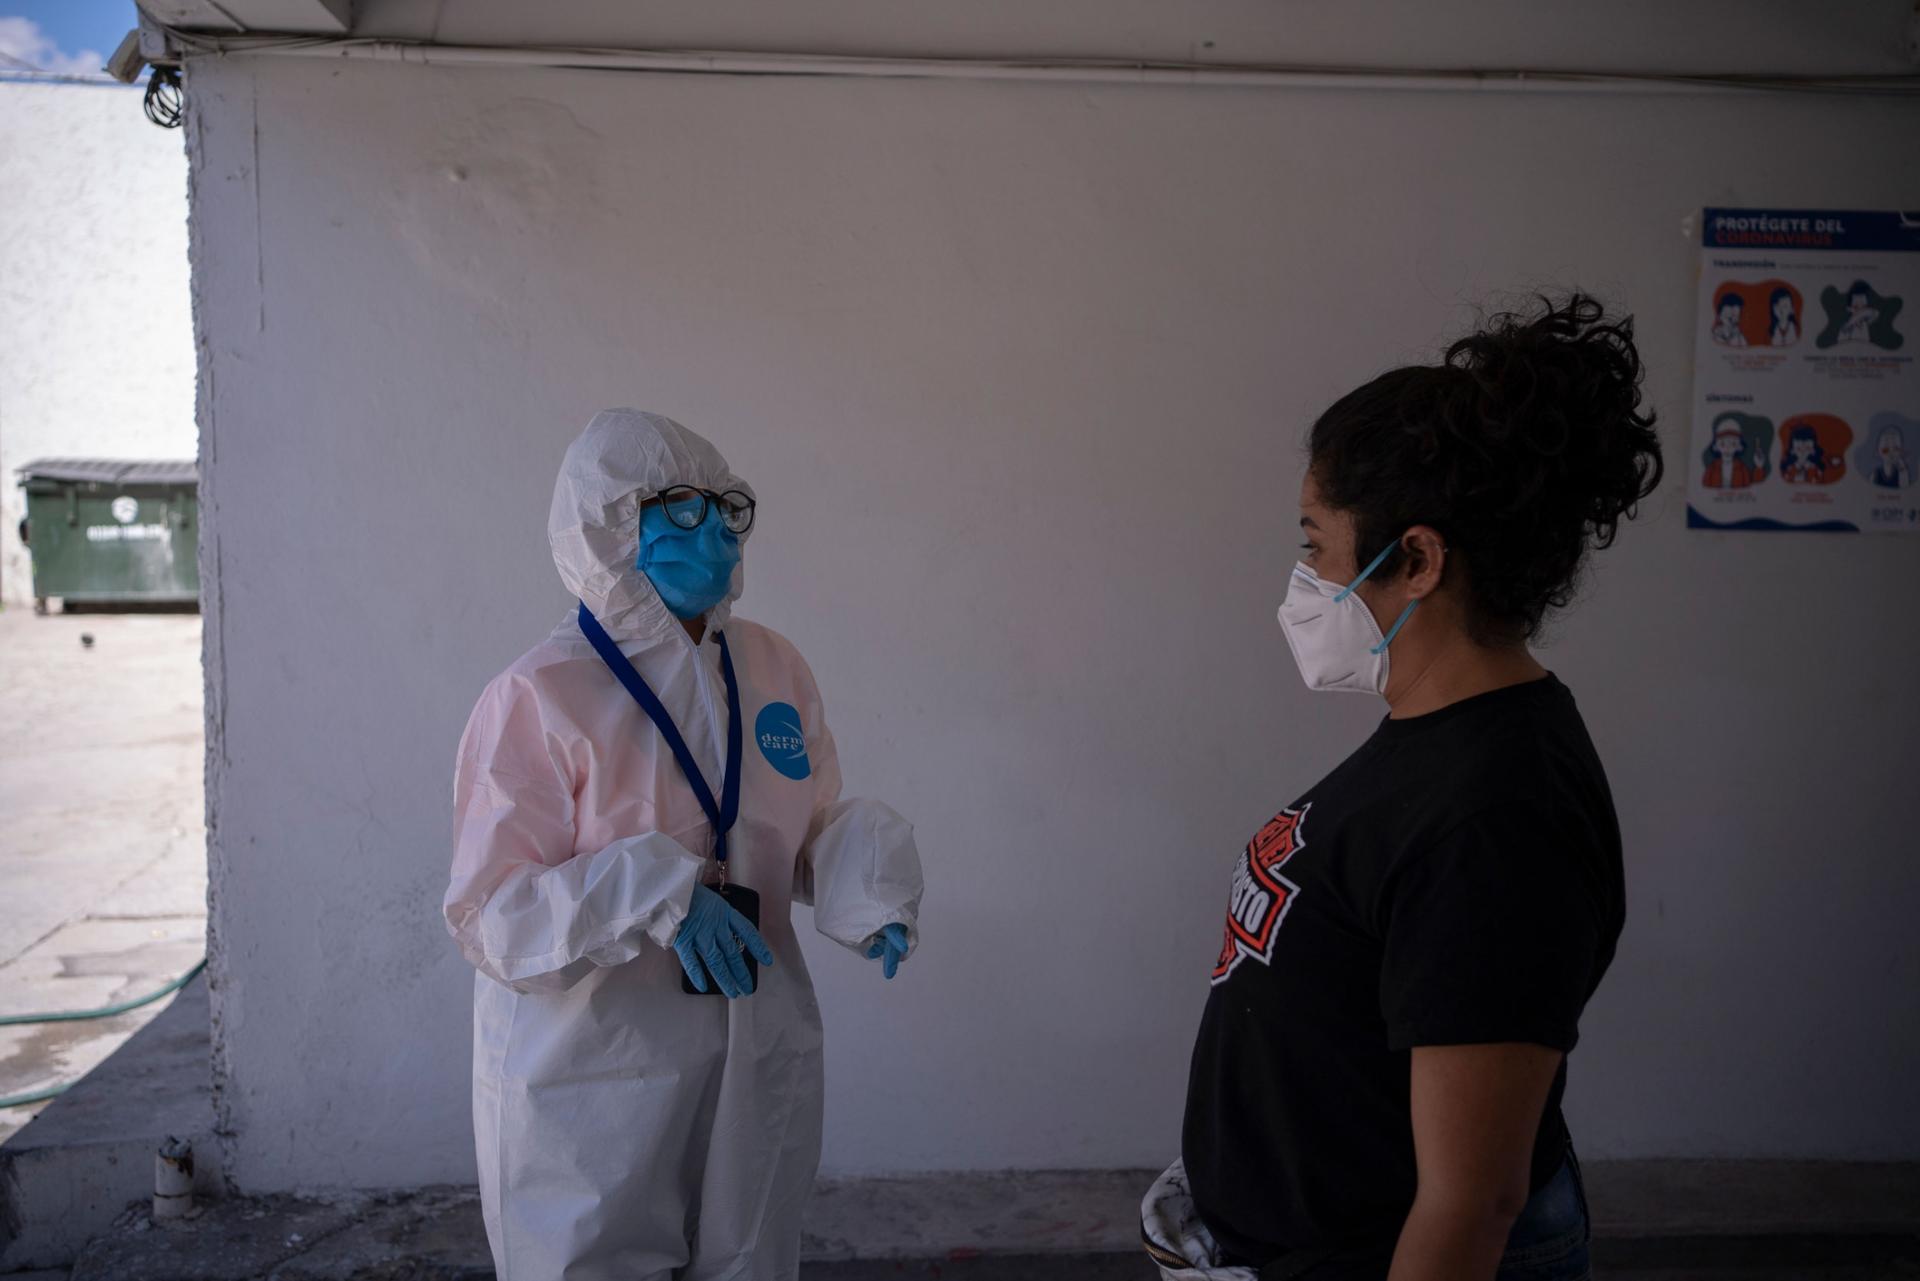 A woman is shown wearing fully covering protective medical clothing and standing across from another woman wearing a white face mask and dark t-shirt.